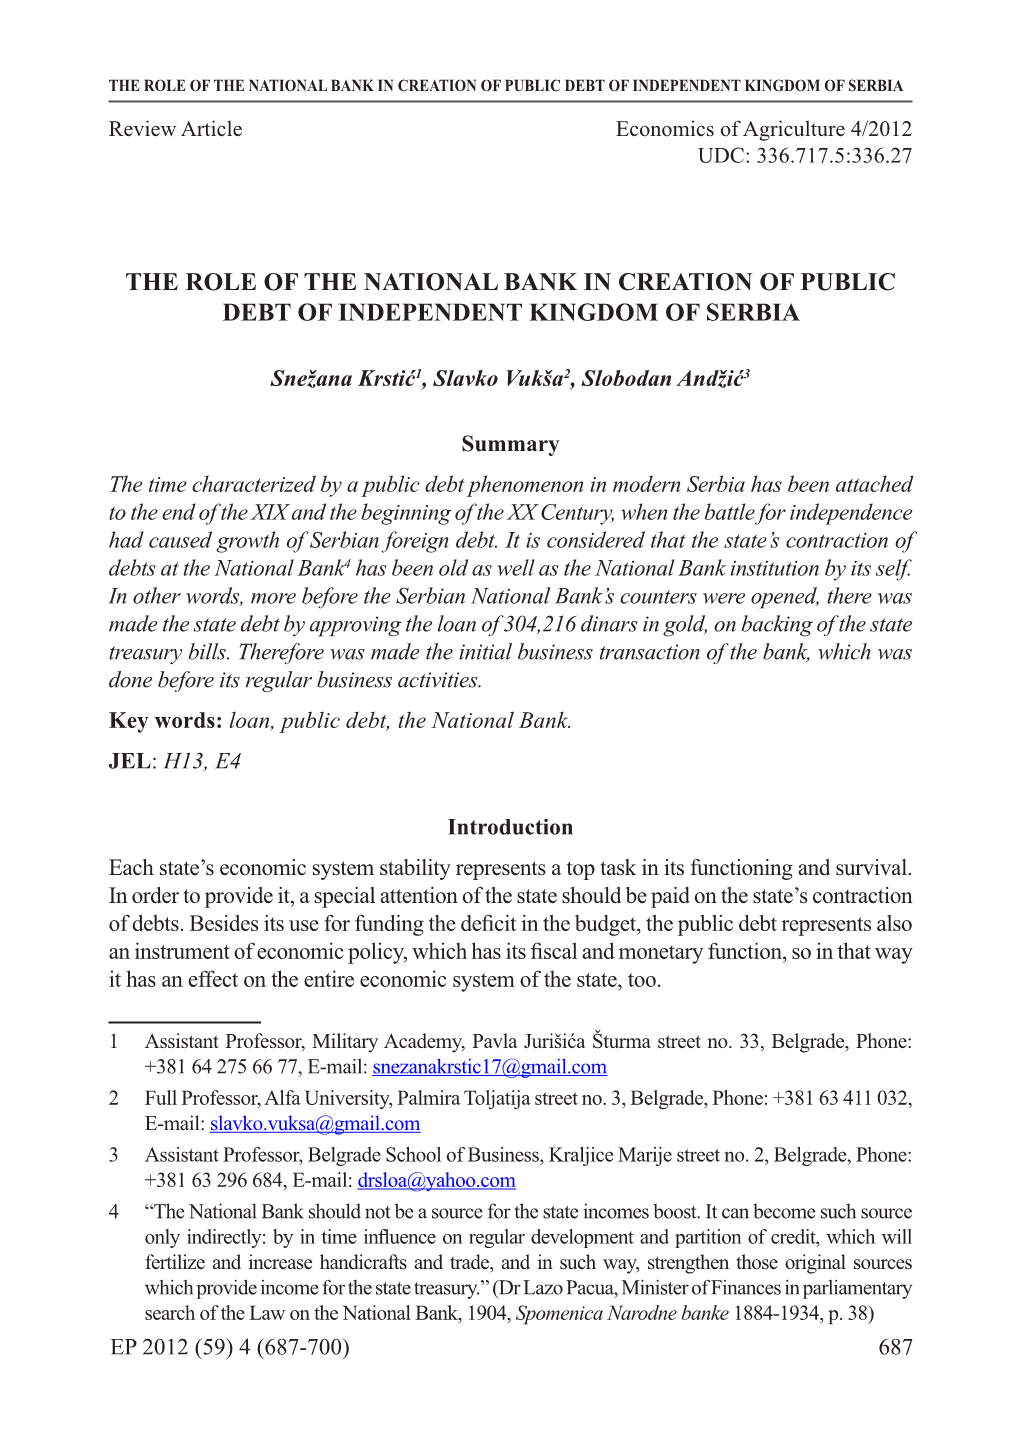 The Role of the National Bank in Creation of Public Debt of Independent Kingdom of Serbia